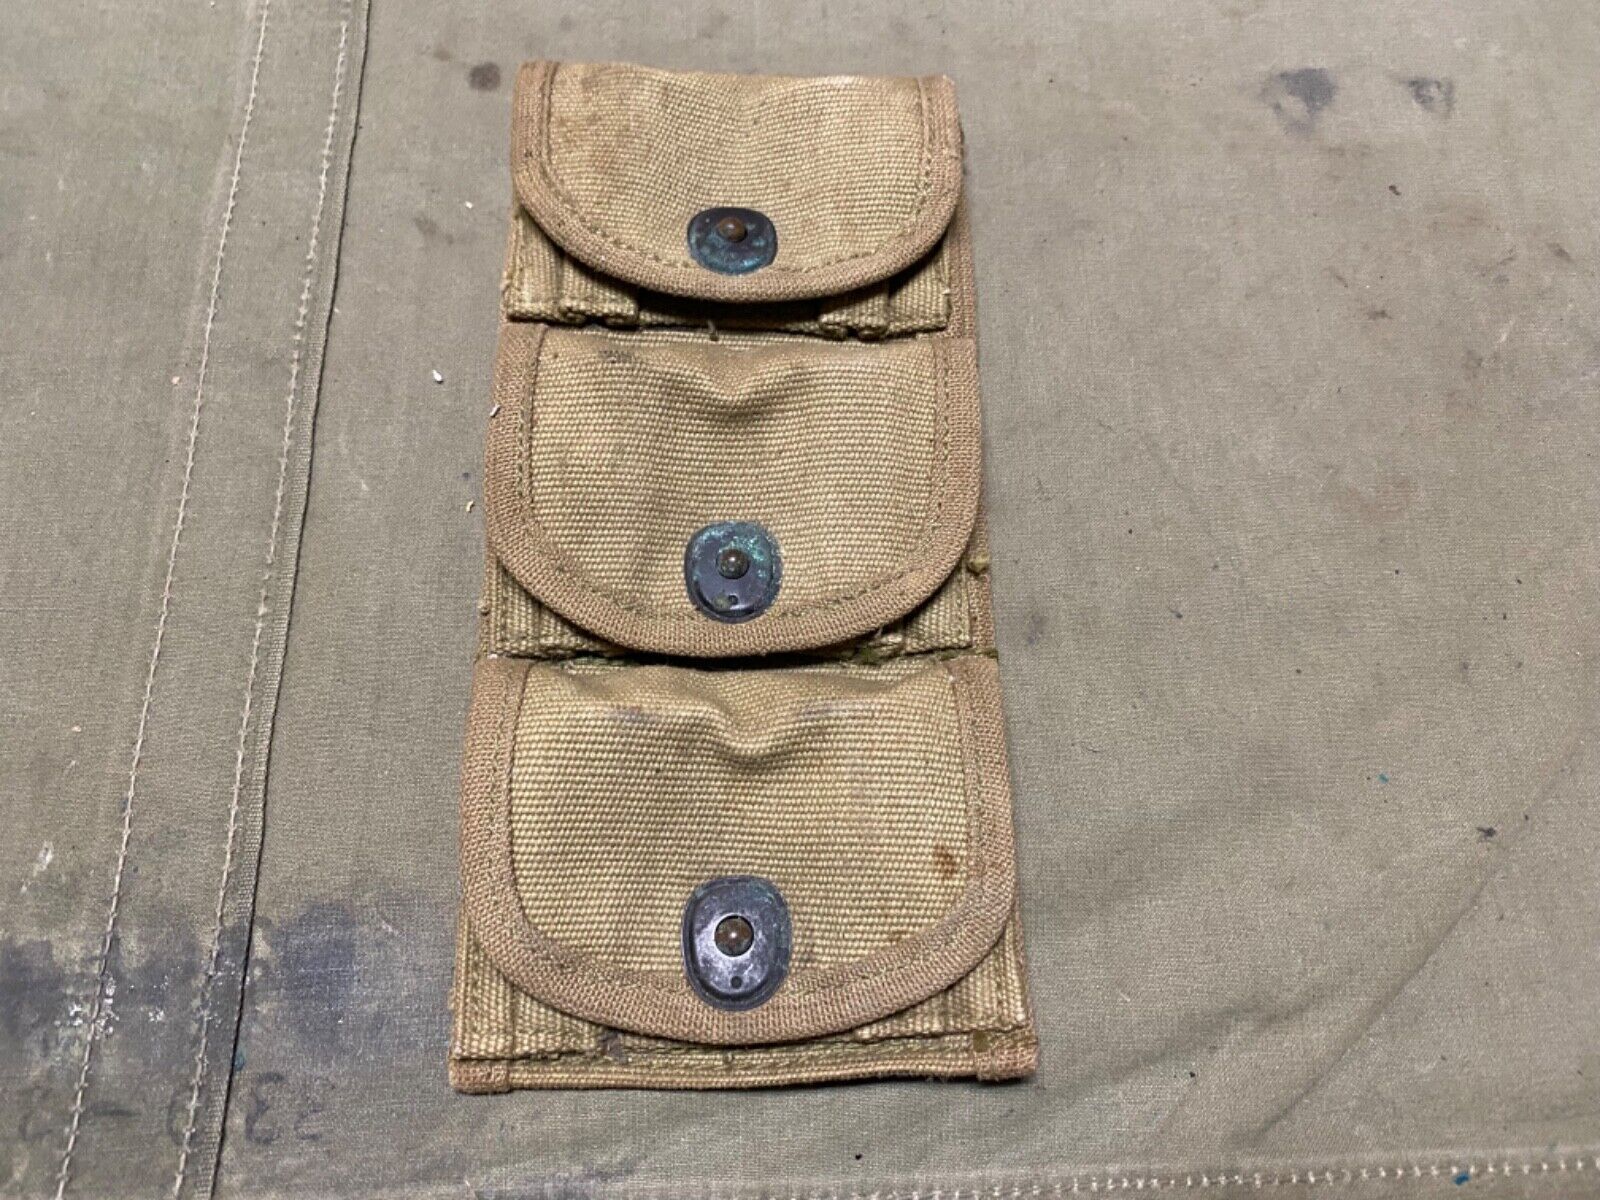 ORIGINAL WWI WWII US ARMY M1917 .45 REVOLVER PISTOL 3 CELL AMMO POUCH